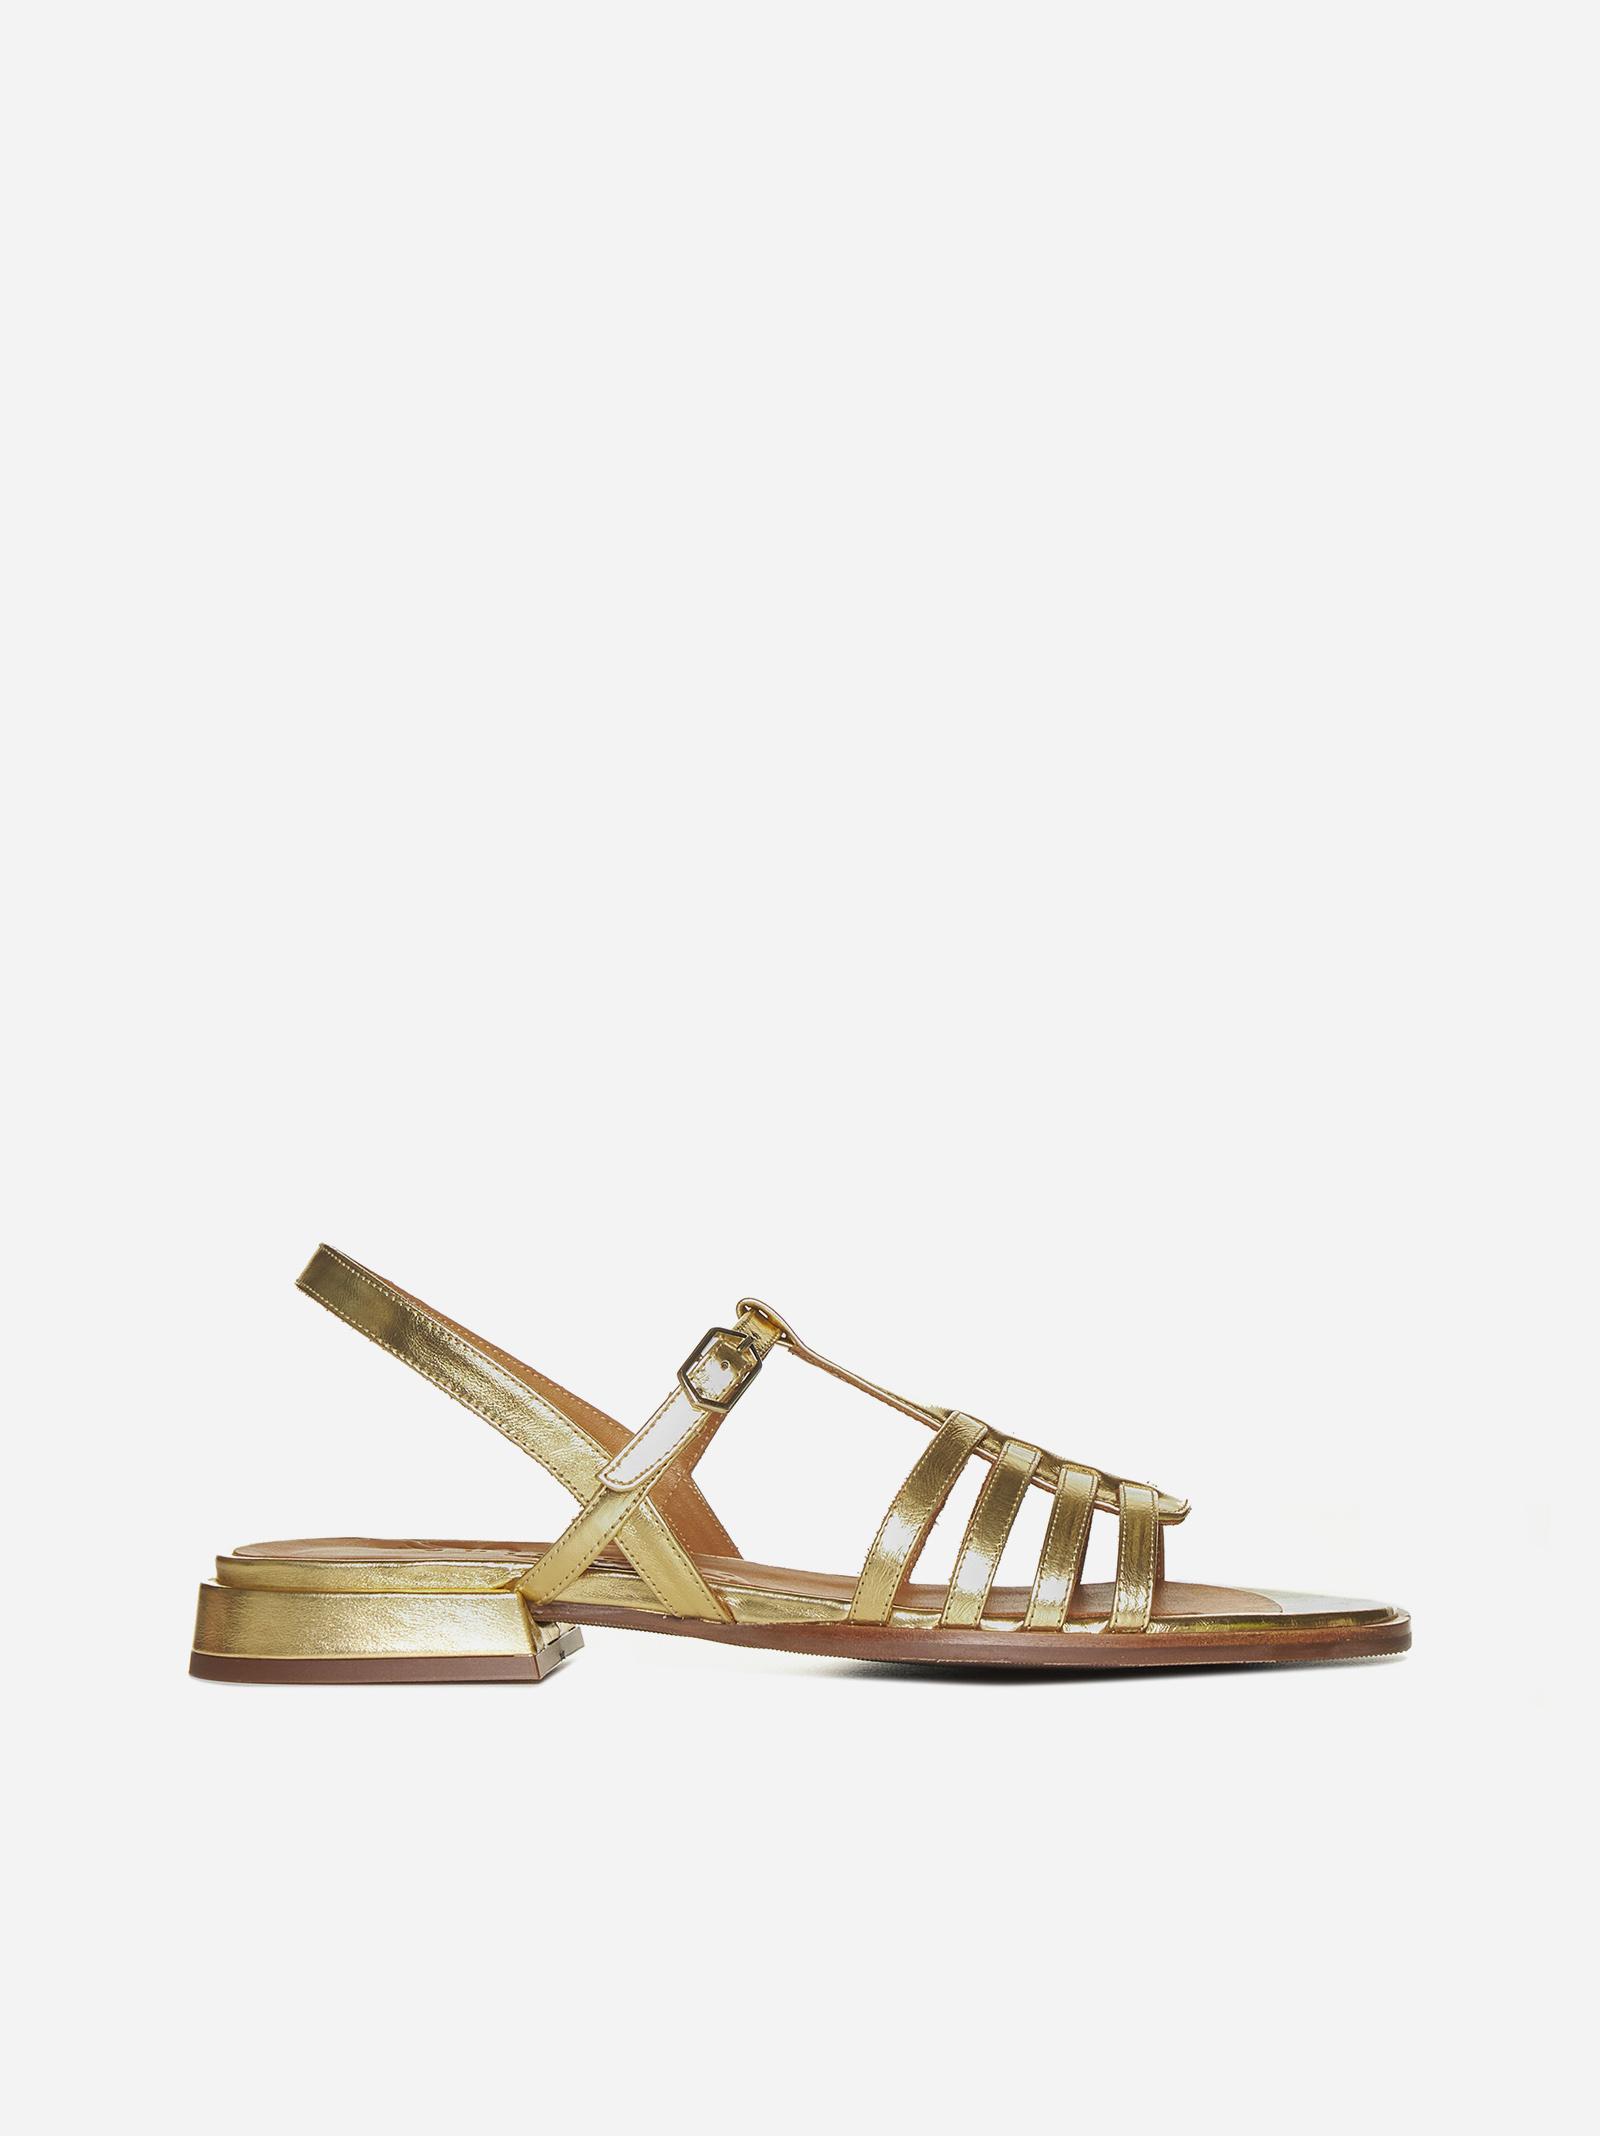 Chie Mihara Wifi Laminated Leather Sandals in Natural | Lyst